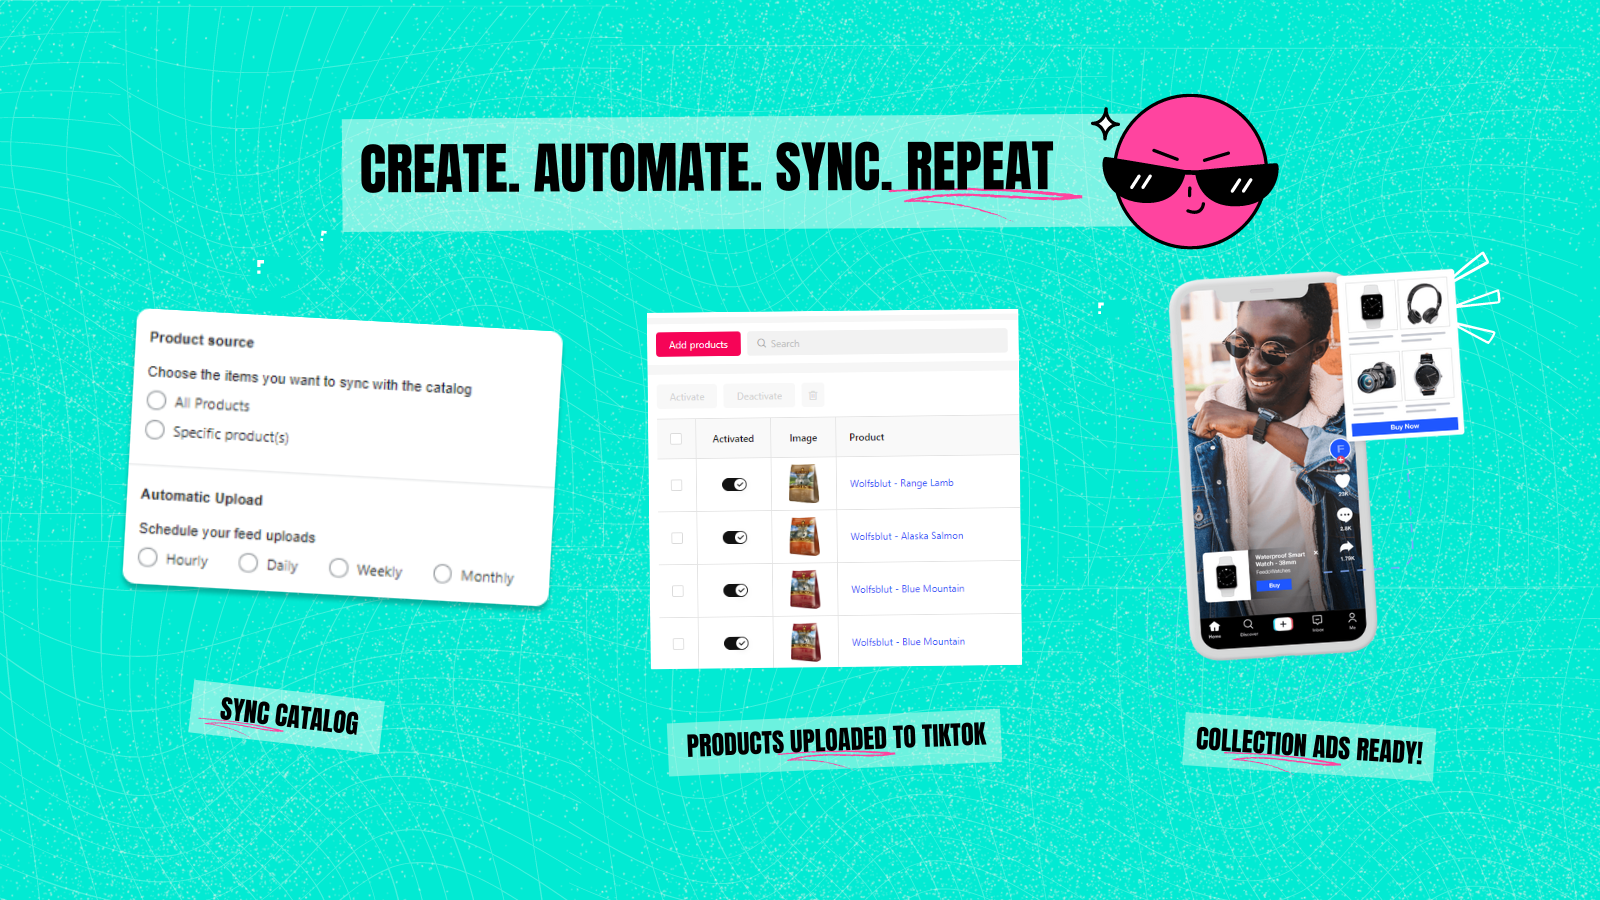 tiktok-catalog-automated-sync-to-get-ahead-with-collection-ads